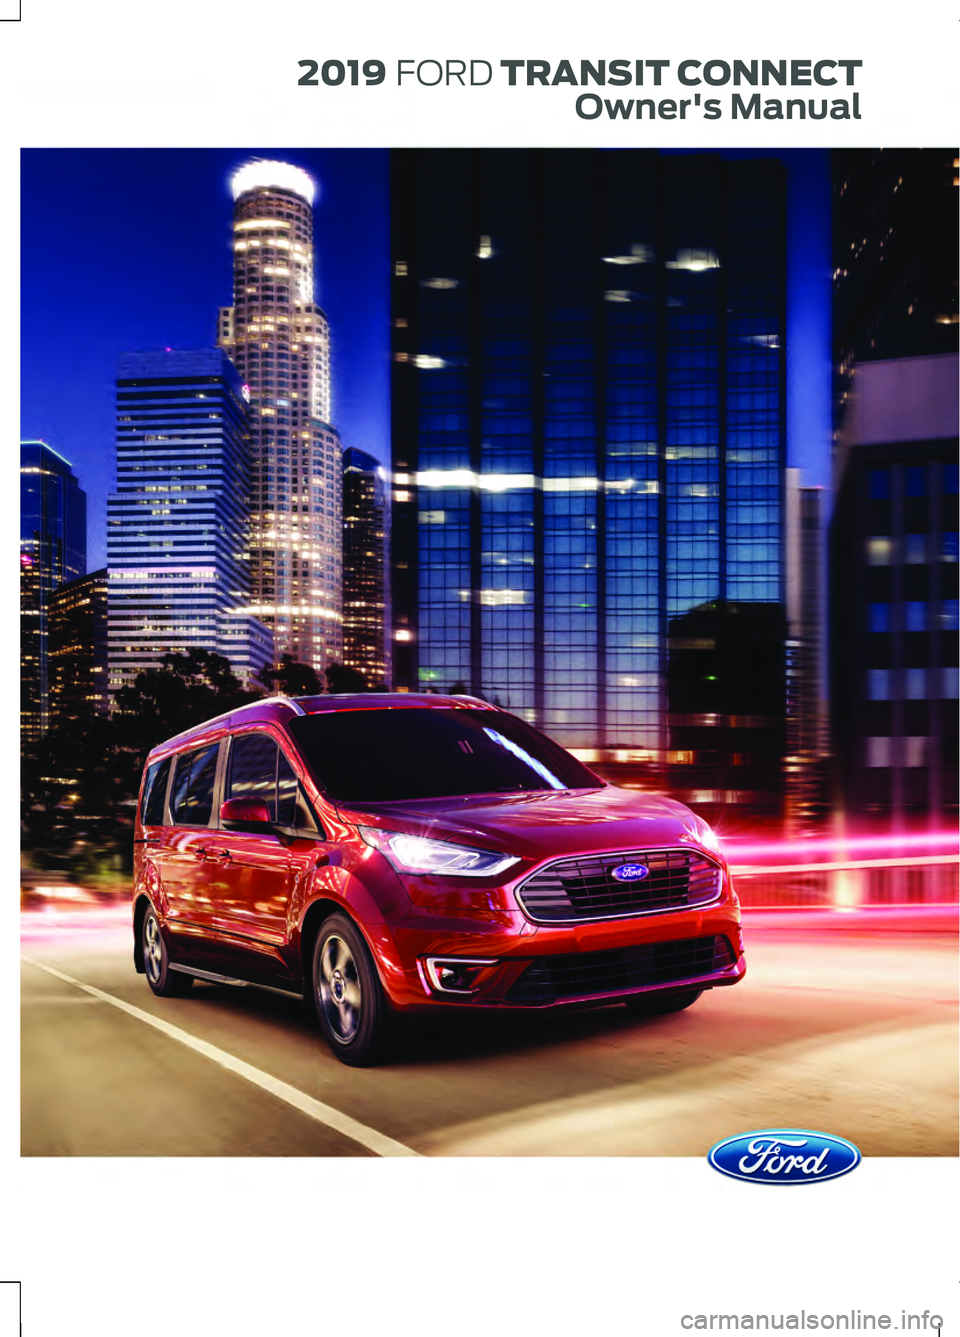 FORD TRANSIT CONNECT 2019  Owners Manual  2019
 FORD TRANSIT CONNECT
Owner's Manual 